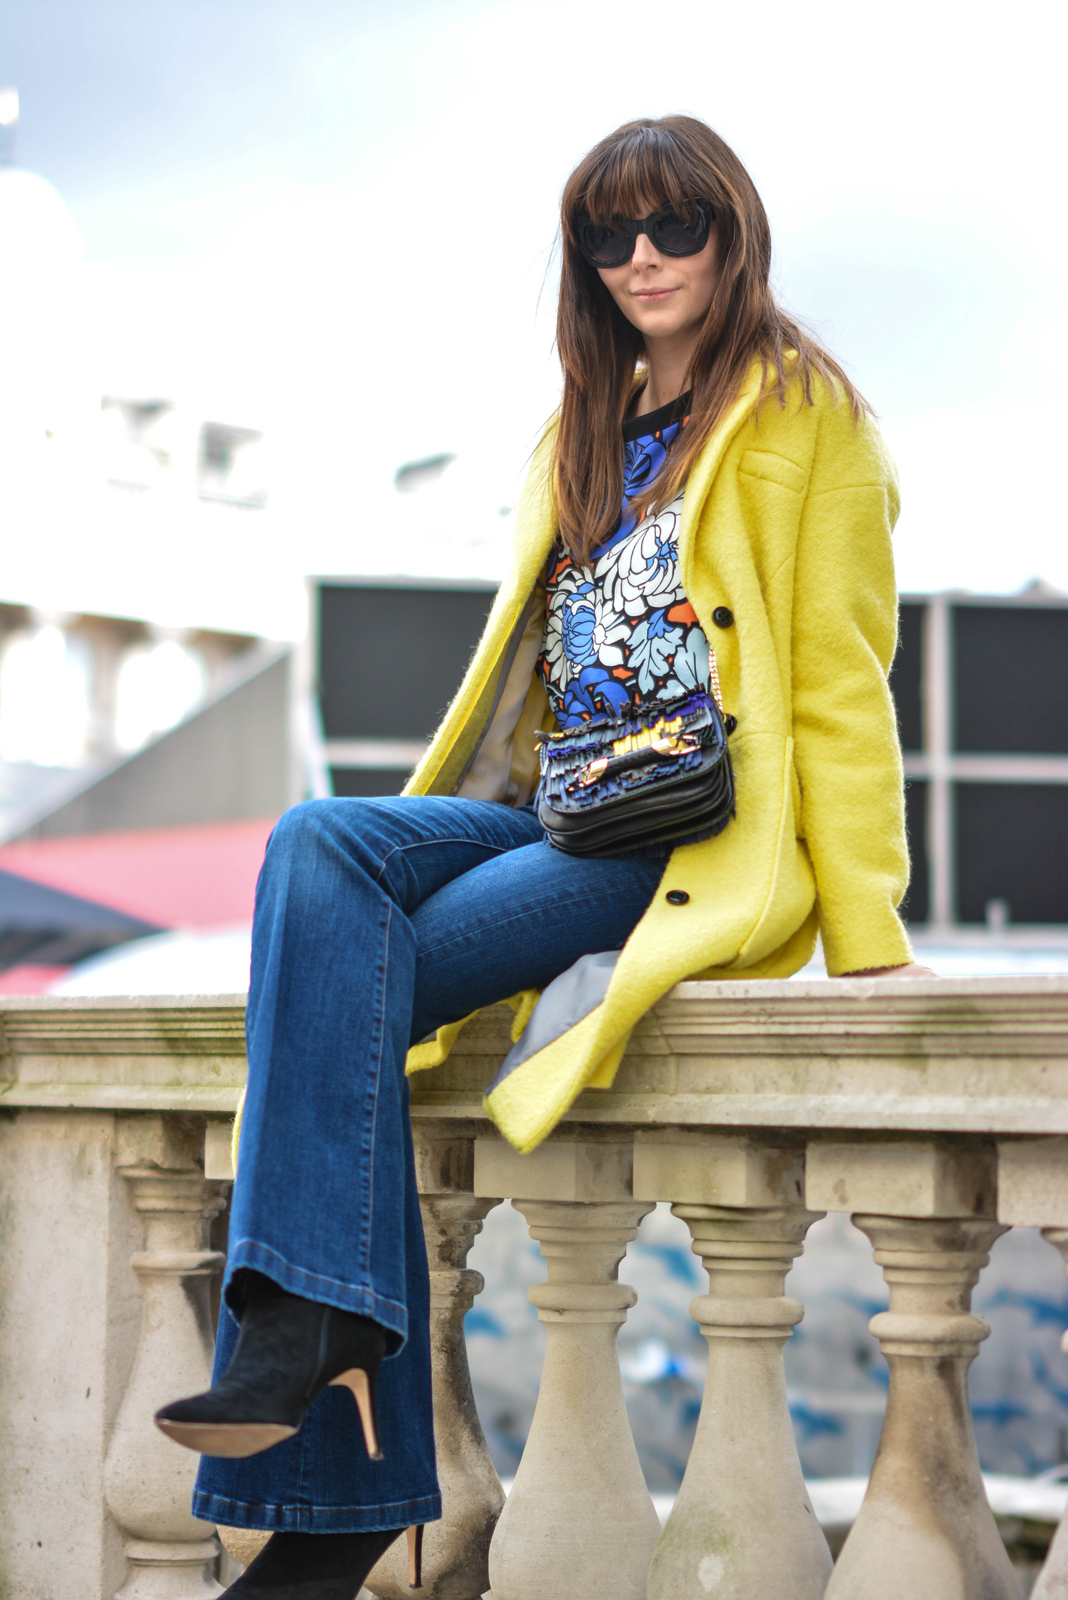 EJSTYLE - Emma Hill, London Fashion Week, LFW AW15, LFW FW15, Street style, Topshop top, Flare jeans, Yellow coat, OOTD, Topshop print blouse, Jimmy Choo fringe bag, Dune Naturally boots